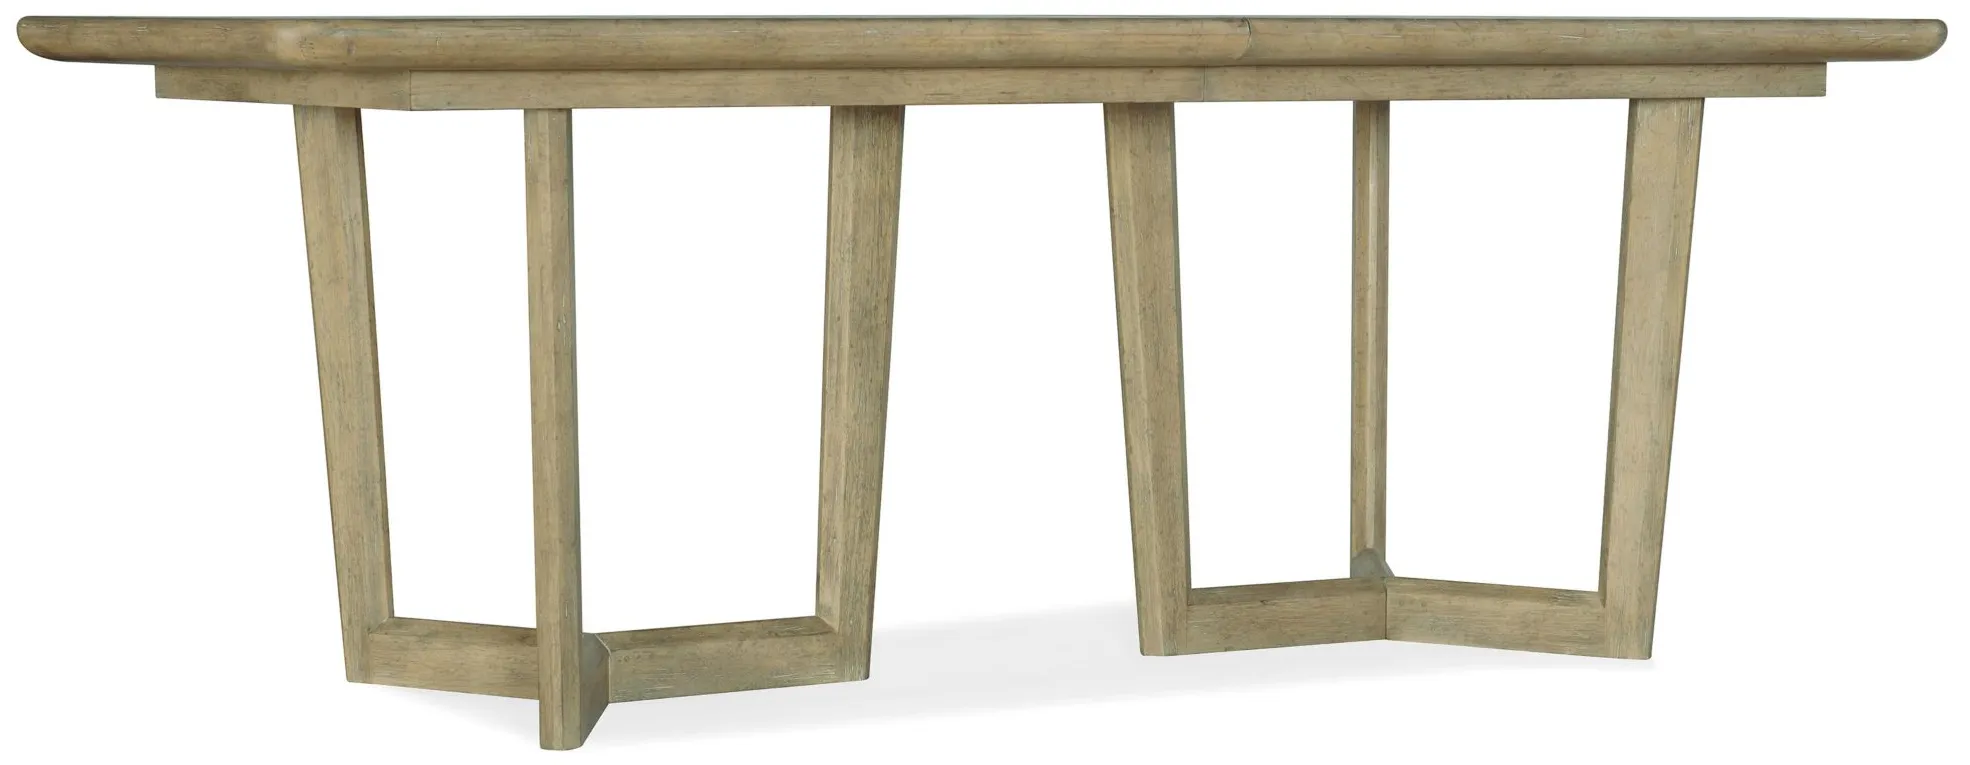 Surfrider Rectangular Dining Table with Two Leaves in Driftwood by Hooker Furniture